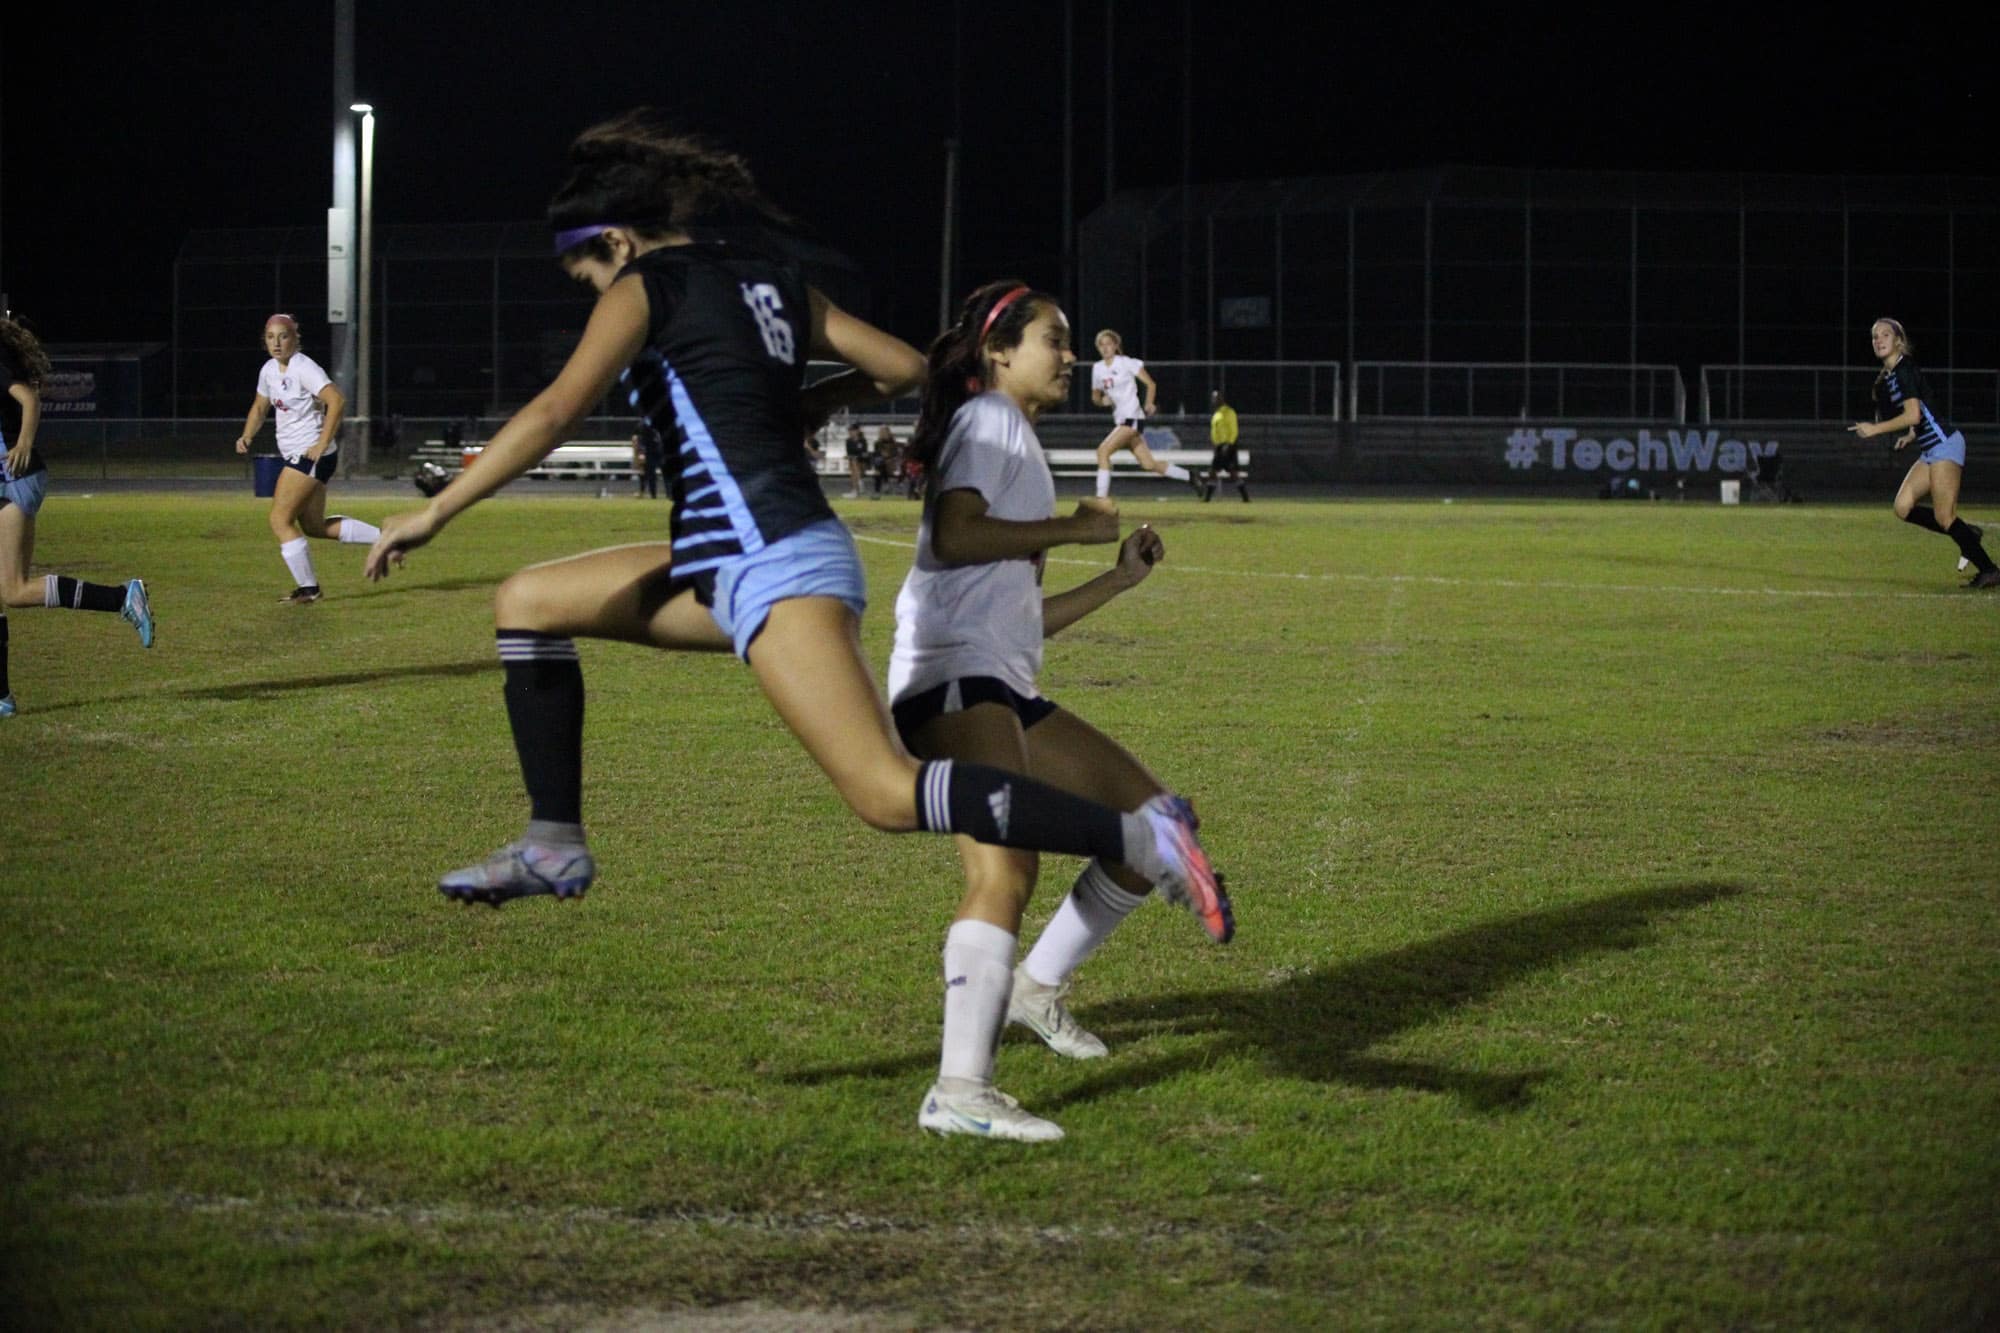 NCT vs Springstead 12/14/22 NCT No. 16 Yailen Soto LeBron leaps in the air during the game. Photo by Hanna Fox.